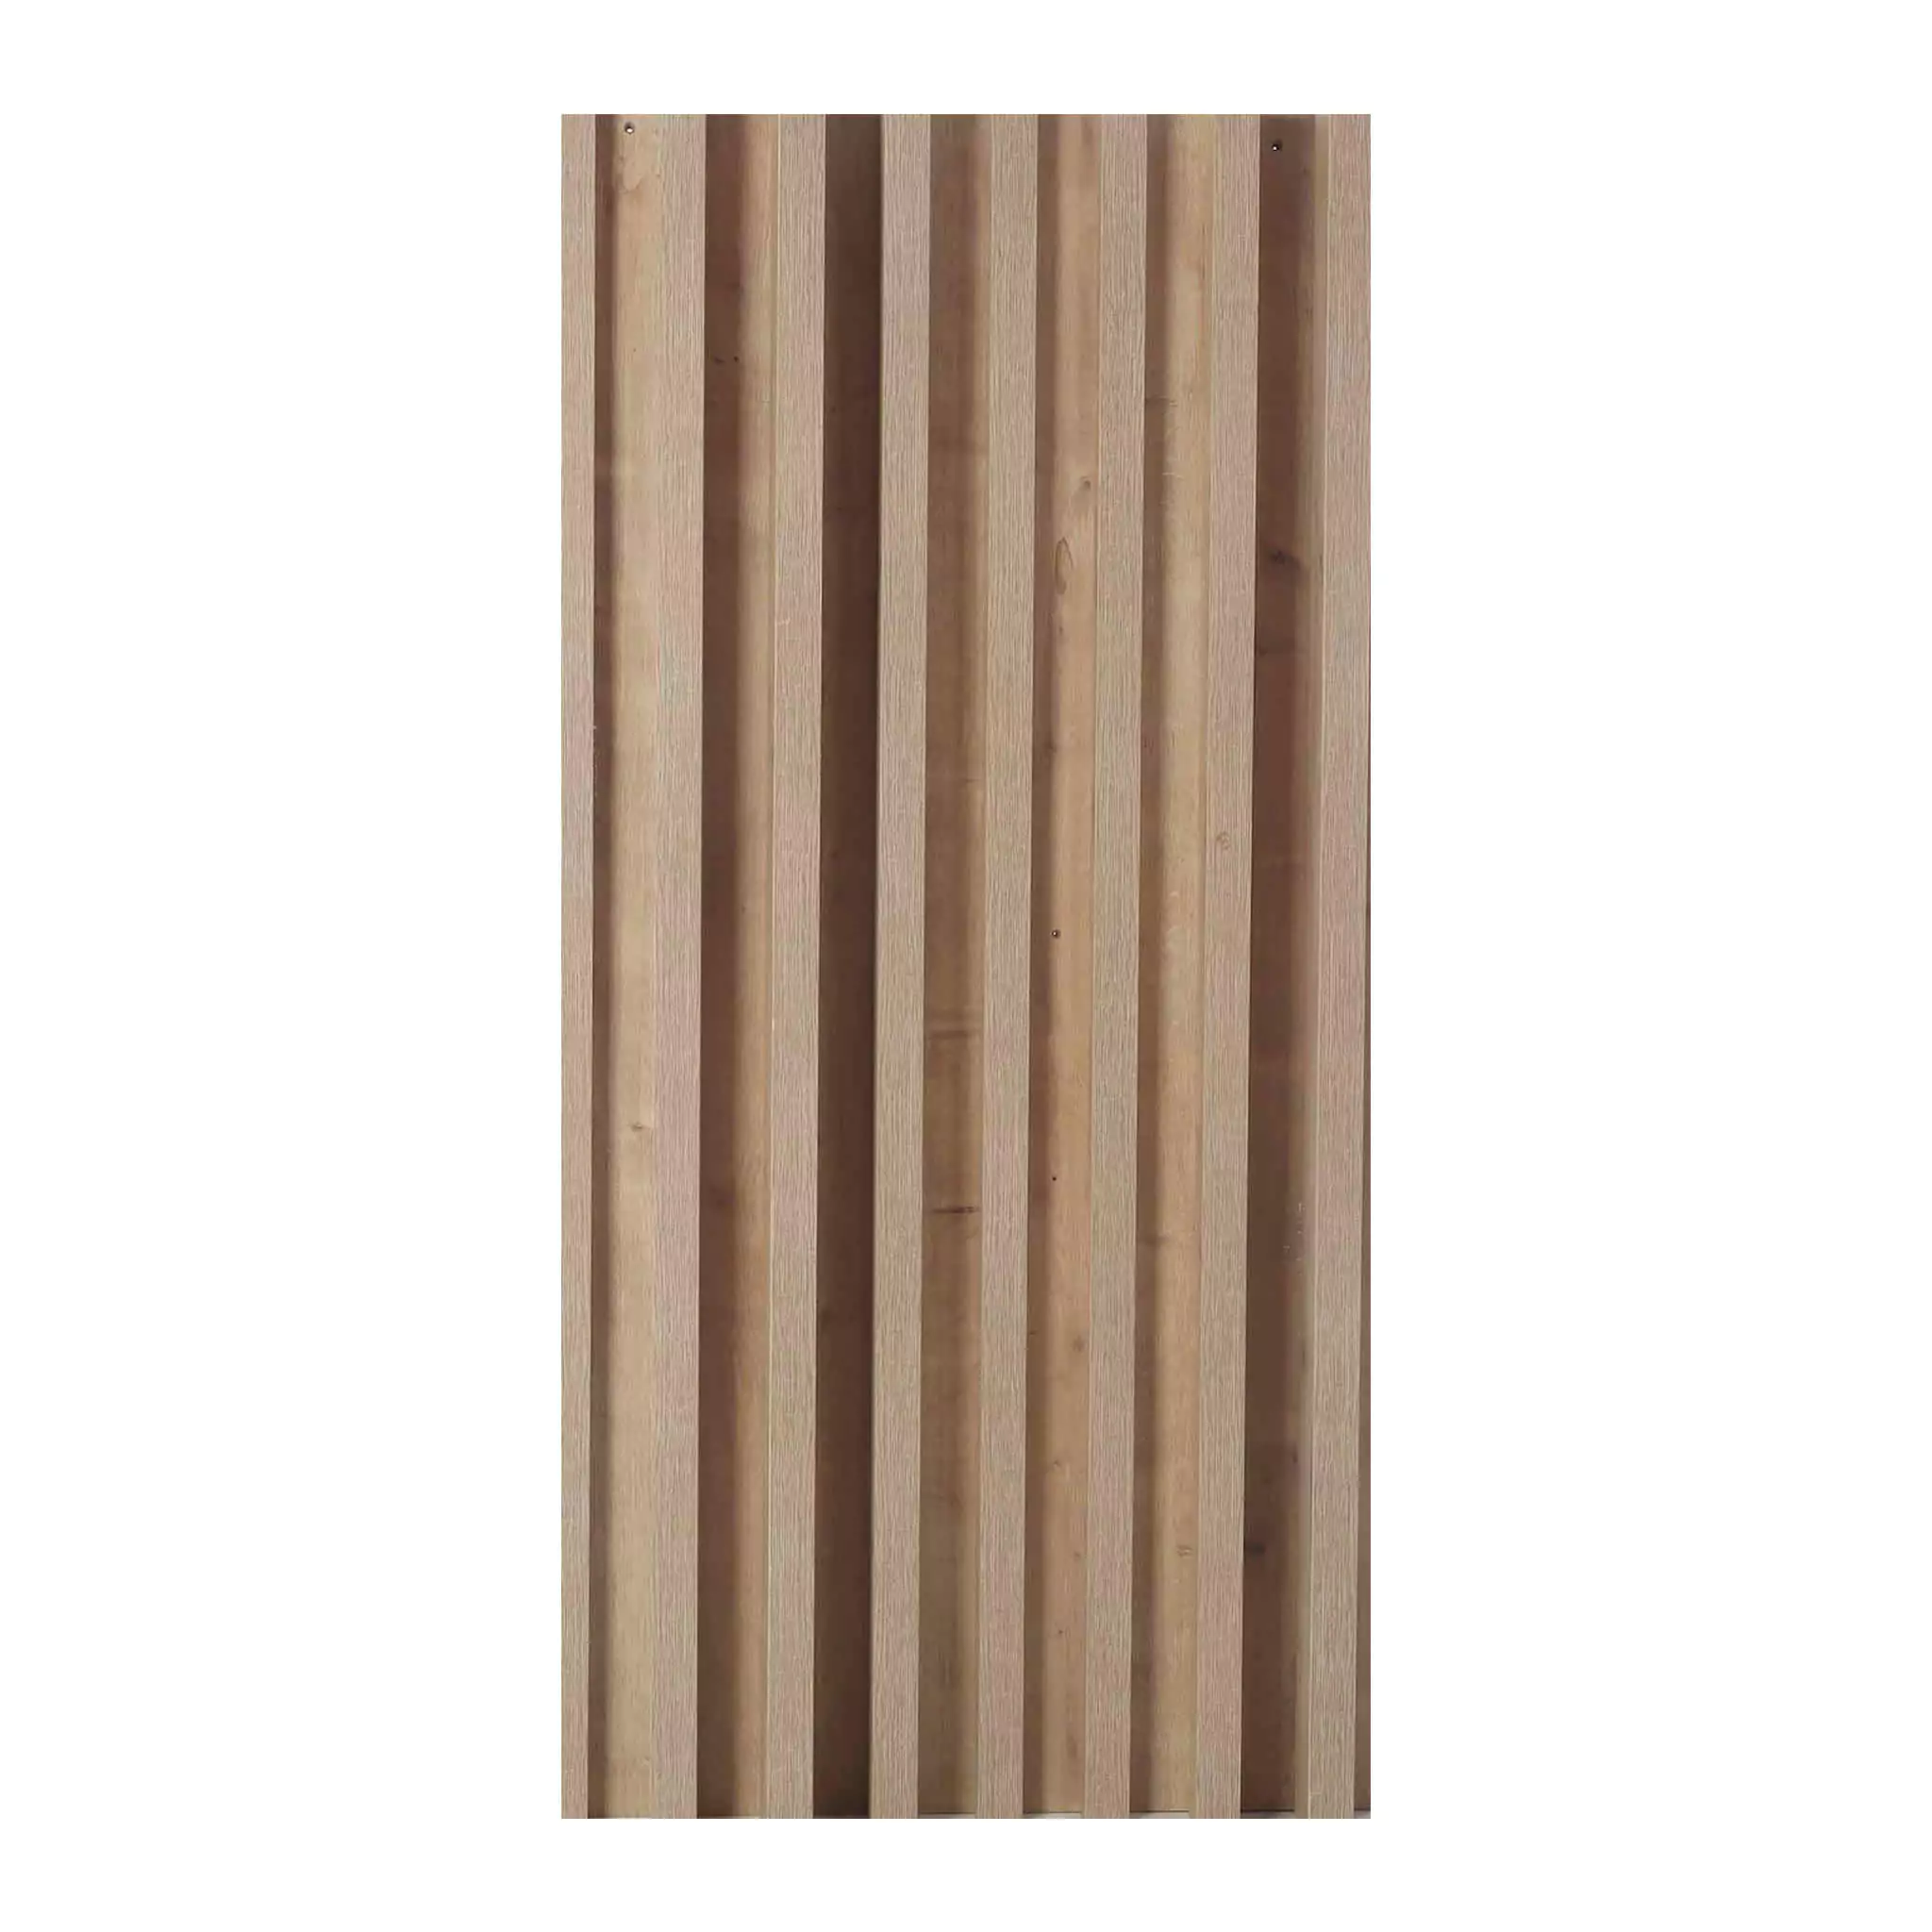 Simko Seating Product Monacoustic Panel Wooden 4